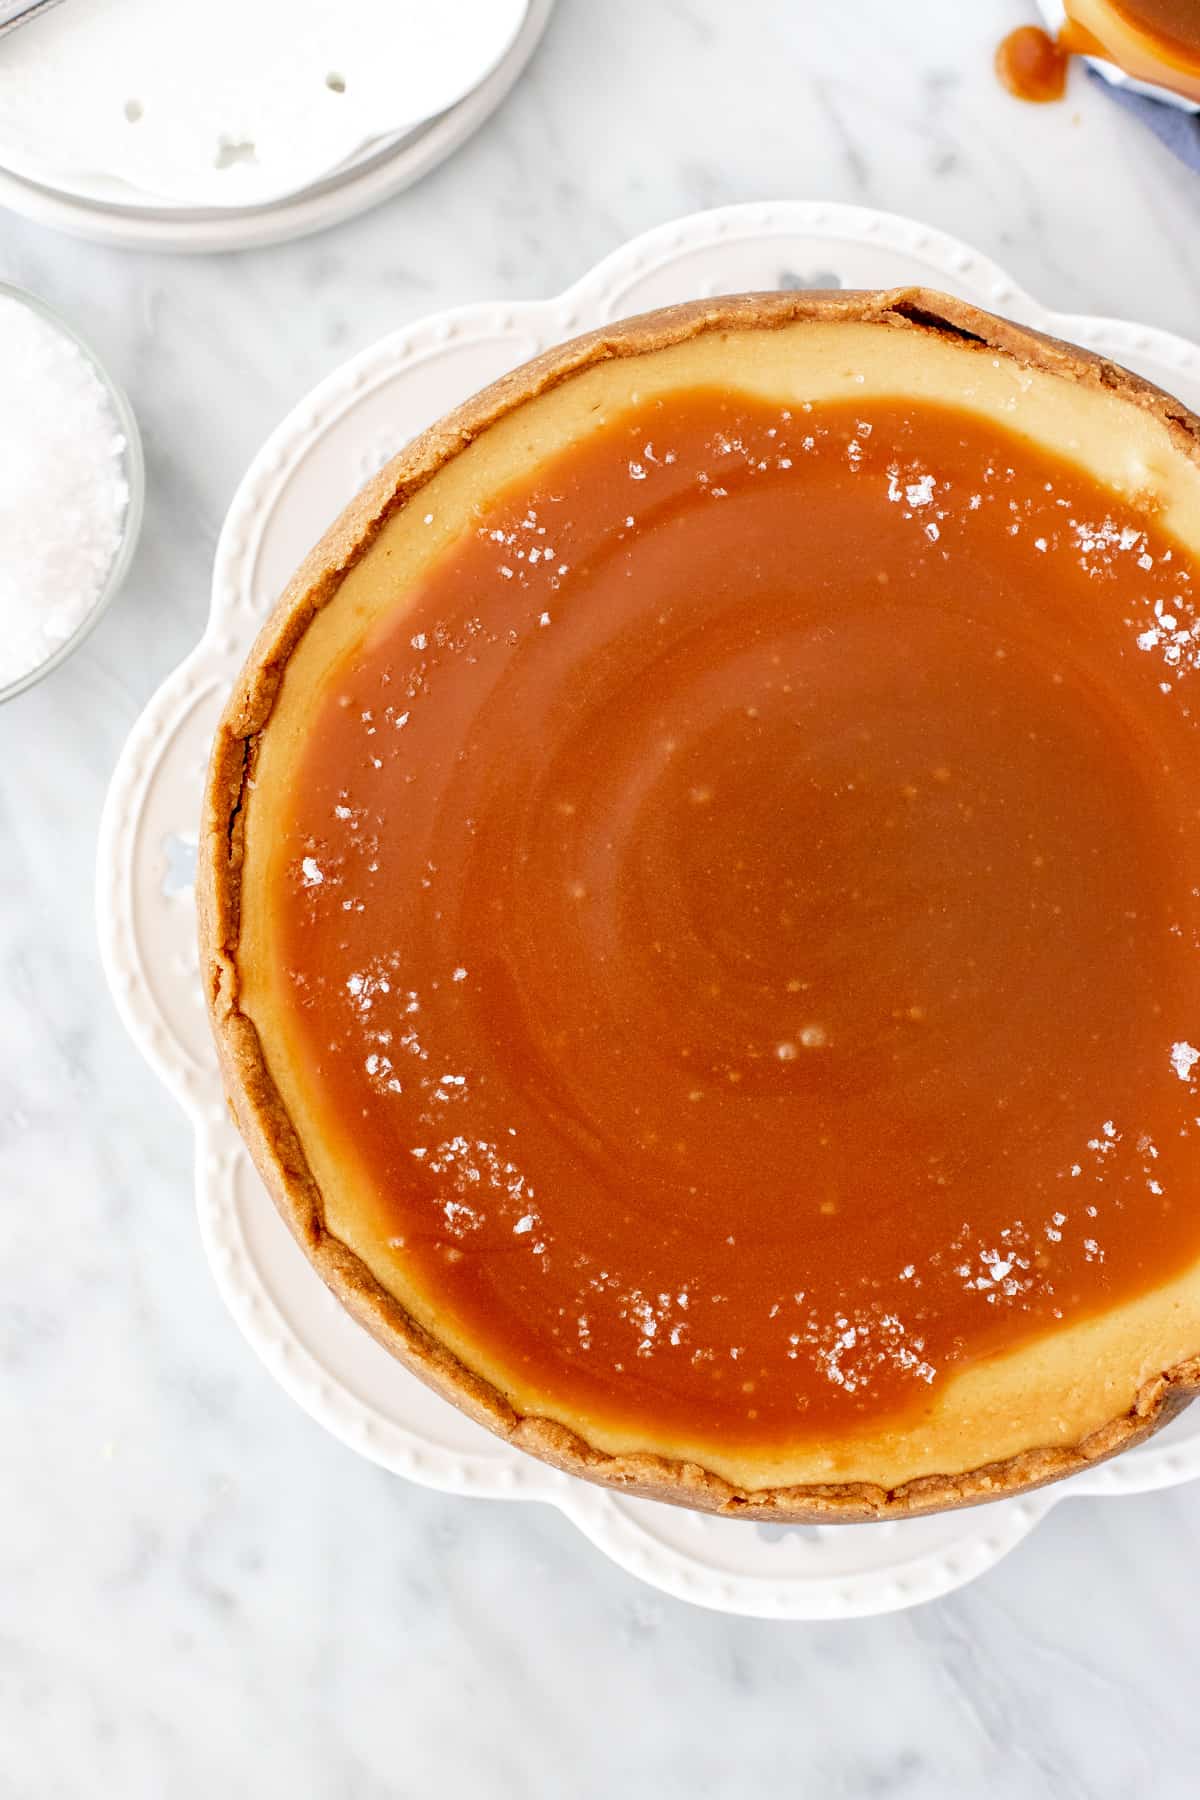 9-inch round cheesecake with caramel sauce on top.